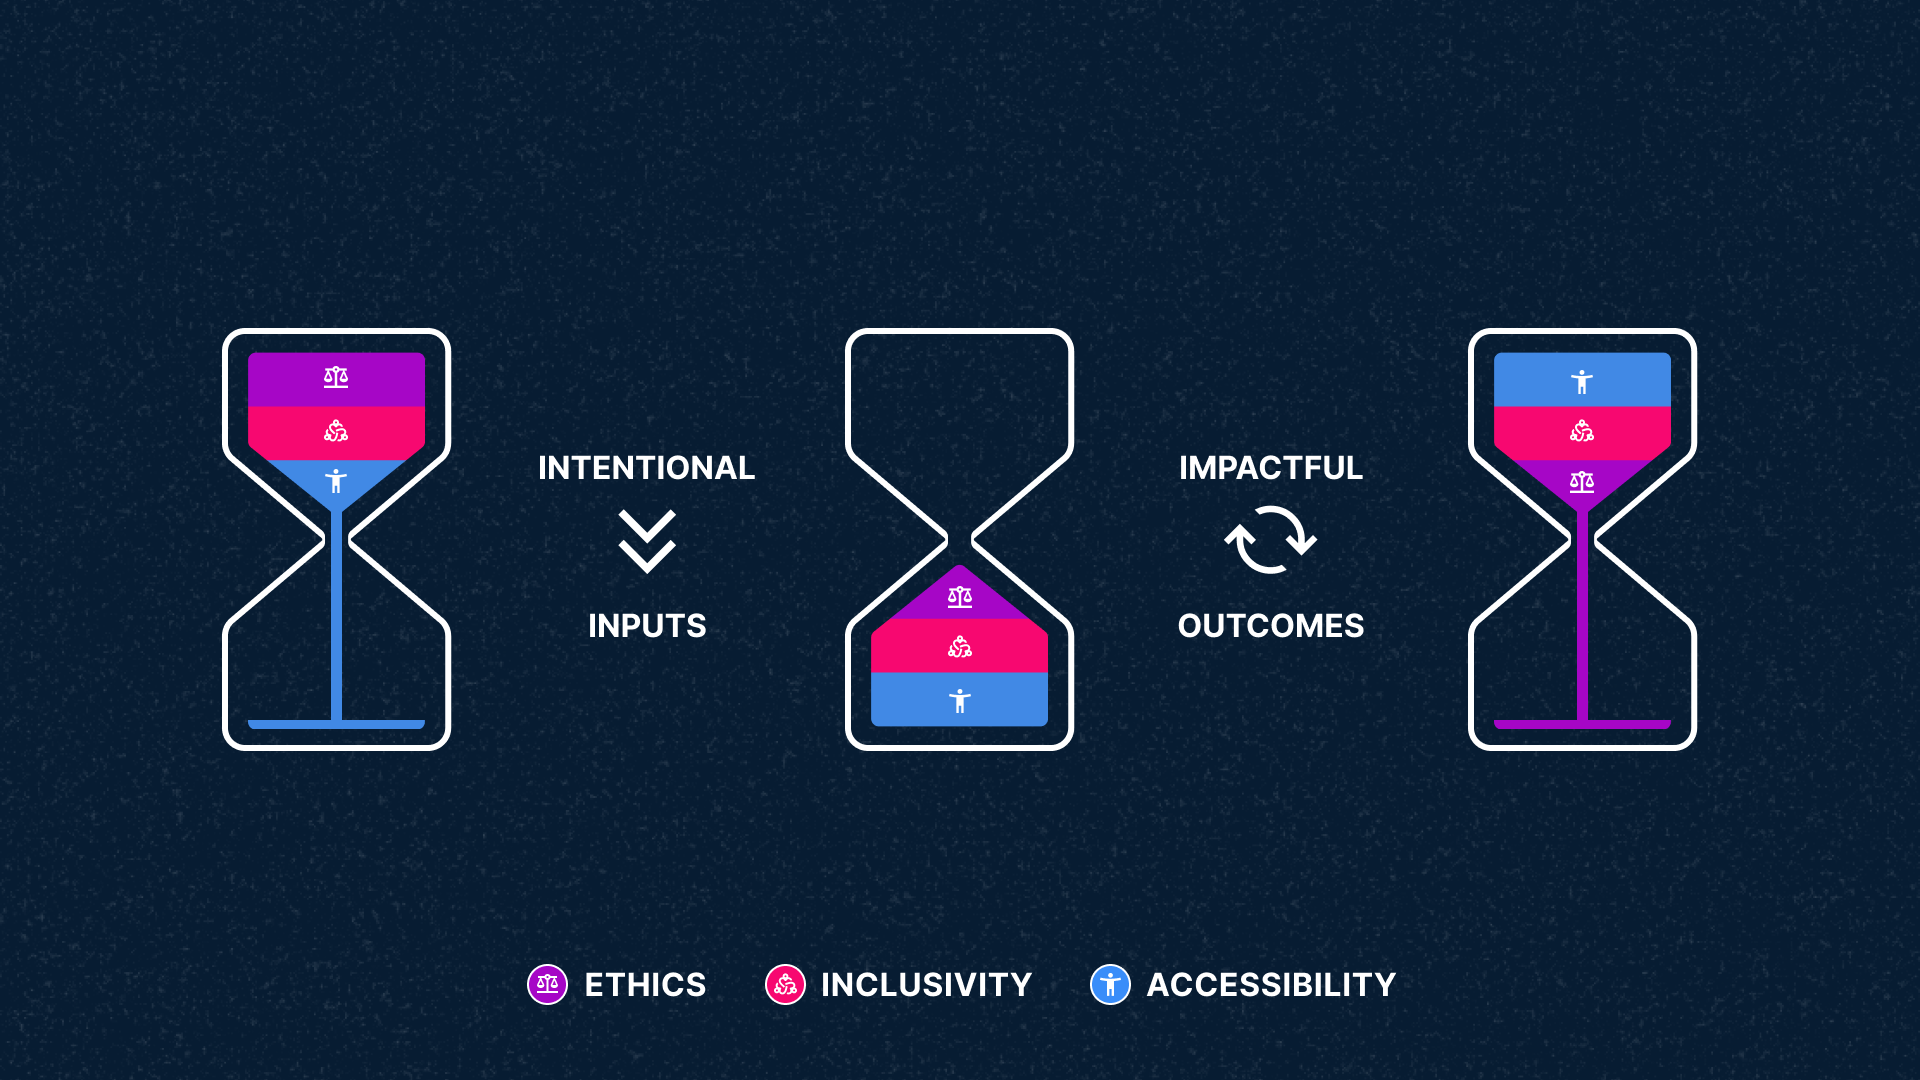 Hourglass infographic depicting the flow of inputs and outputs when considering ethics, inclusivity, and accessibility in designed experiences